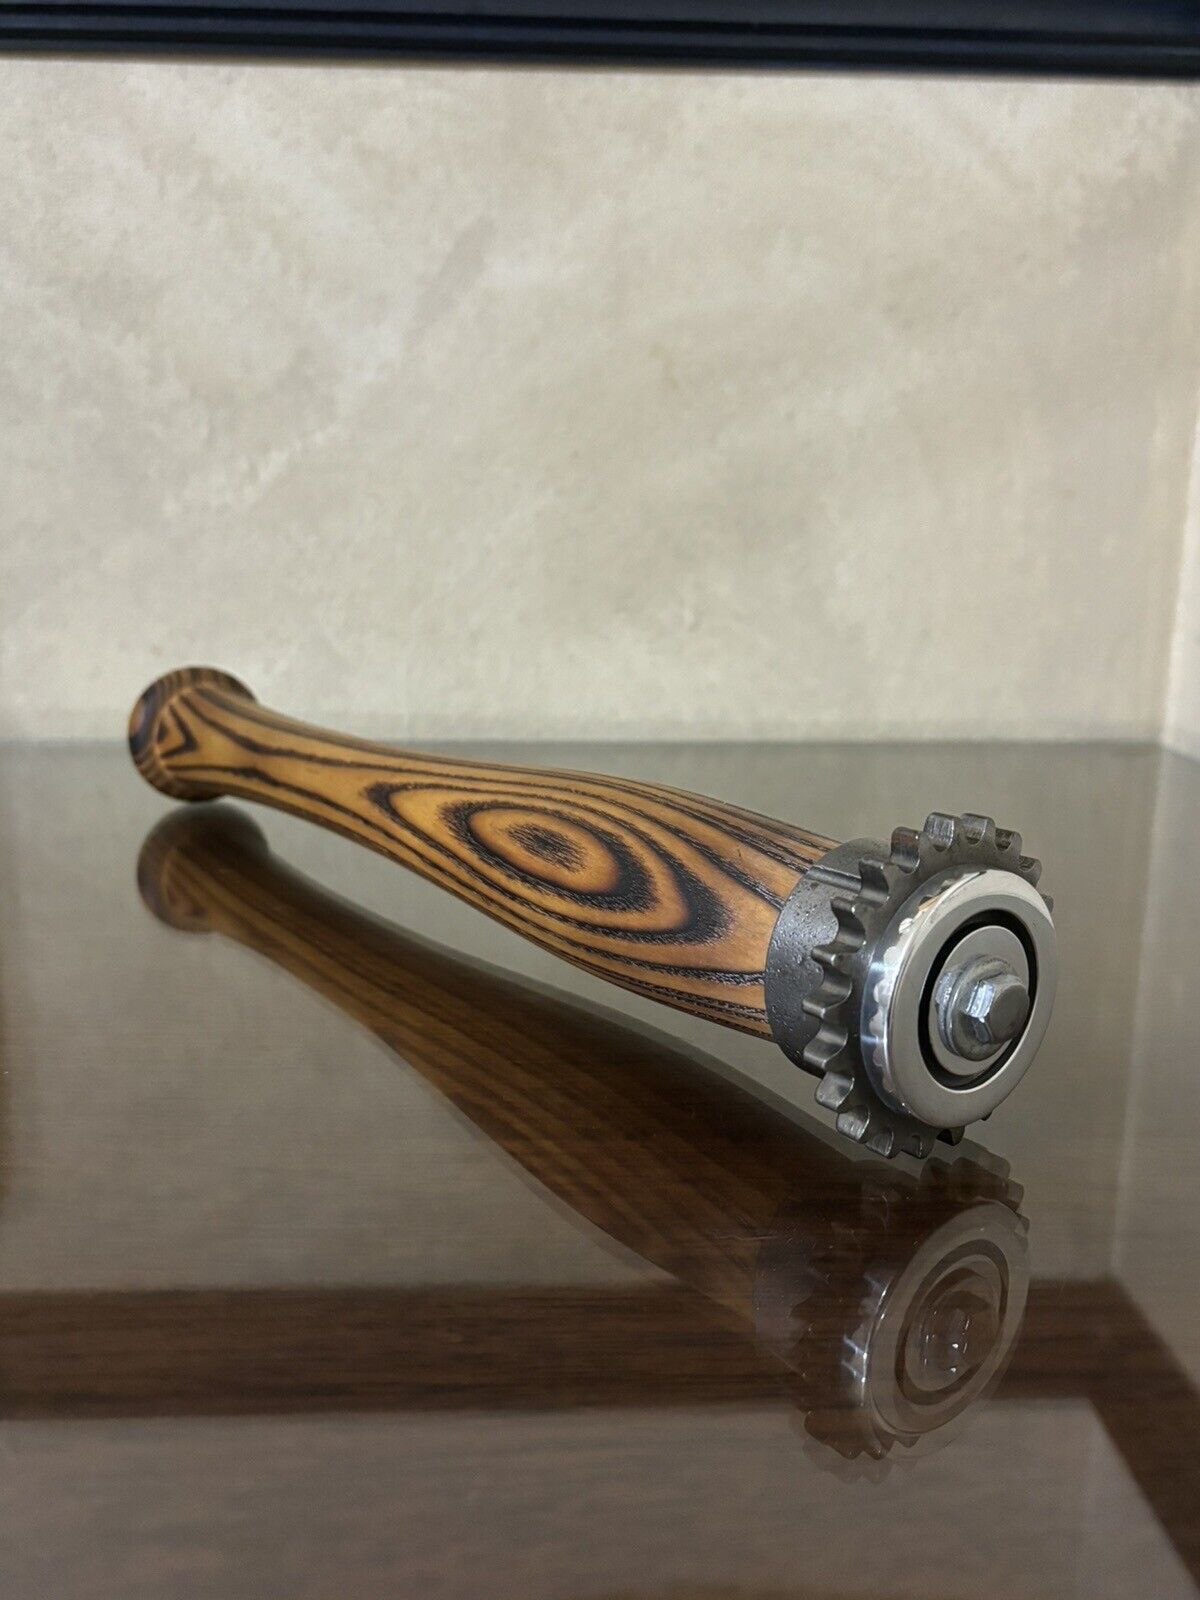 Handmade Turned One-off Cudgel Club Unique Art Man Cave Piece Motorcycle